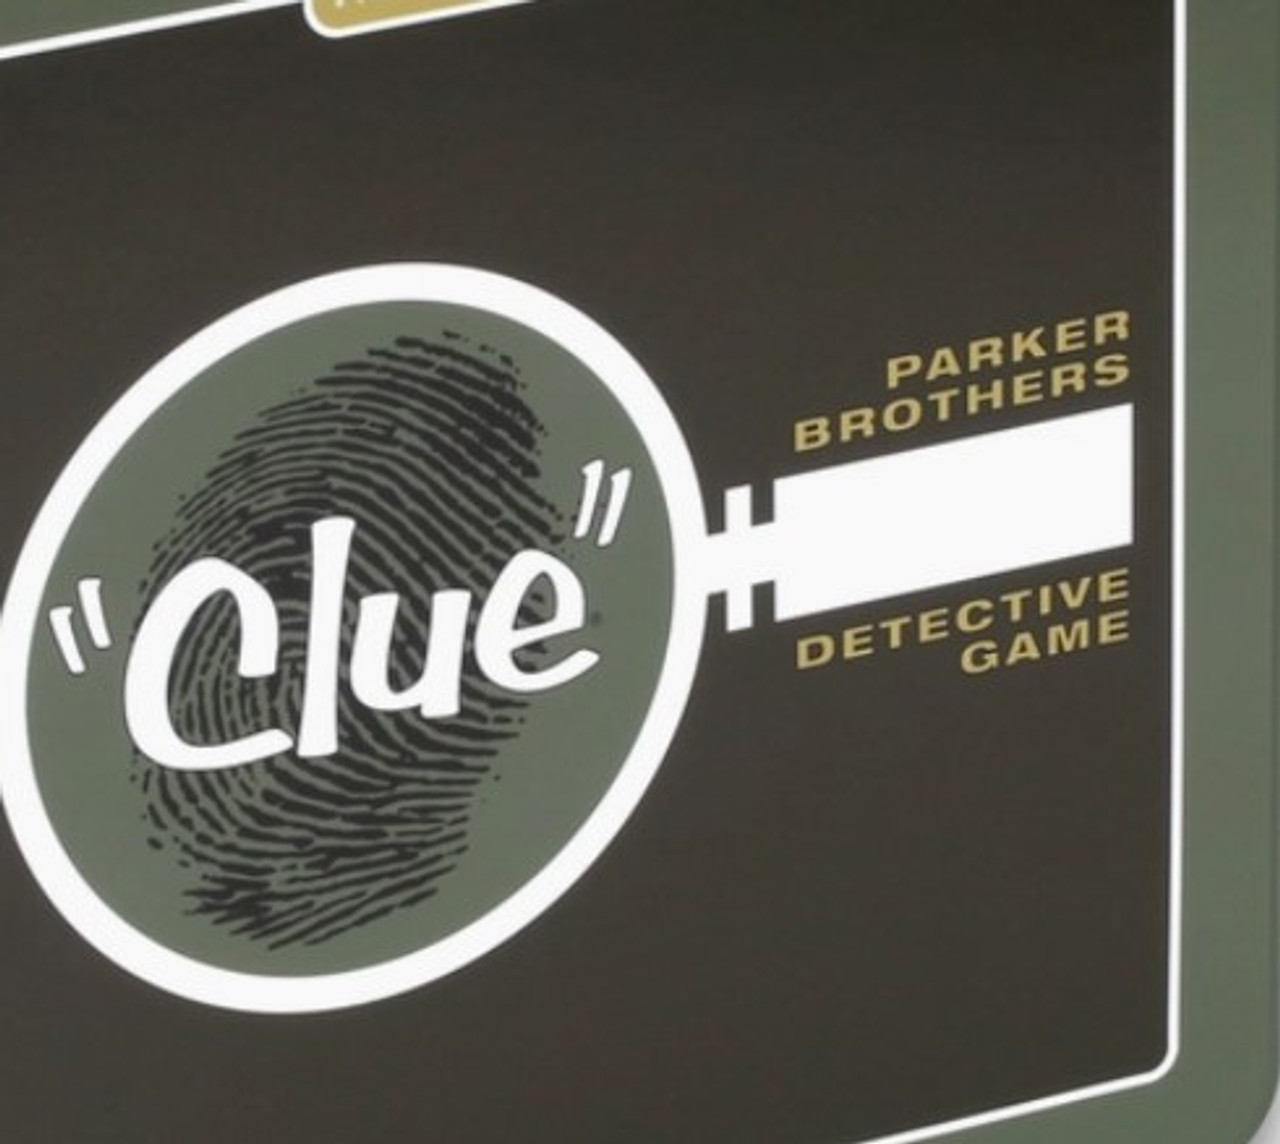 High-End 3D Mystery Games : Hasbro Clue Luxury Edition